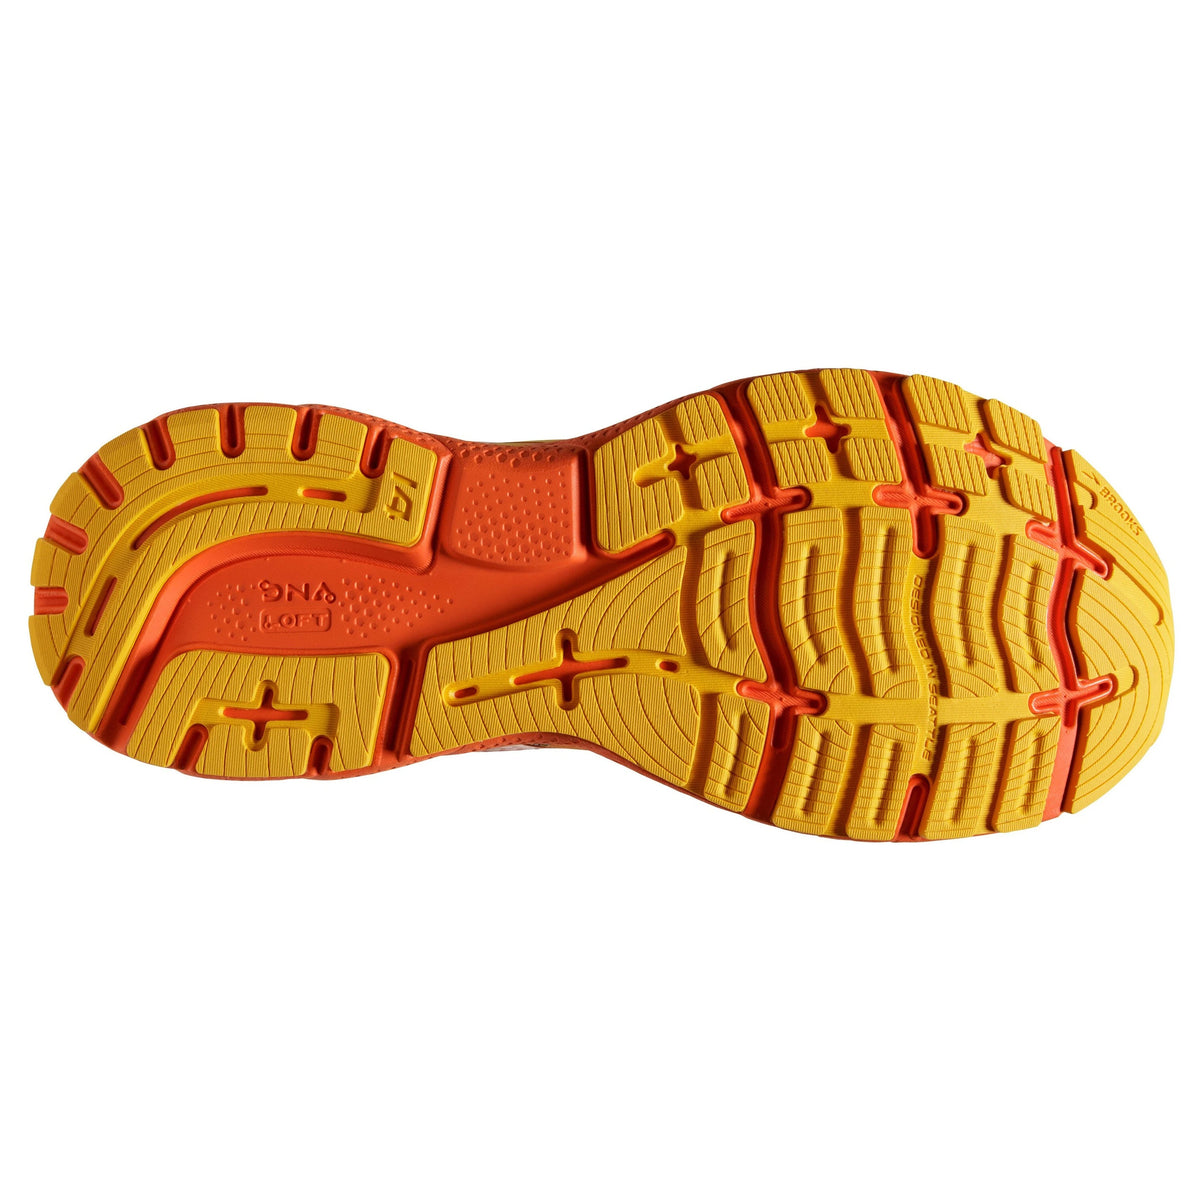 Brooks Women&#39;s Ghost 14 running shoe with a citrus/gold flame/orangeade colorway features Brooks Ghost cushioning technology in the orange rubber sole.